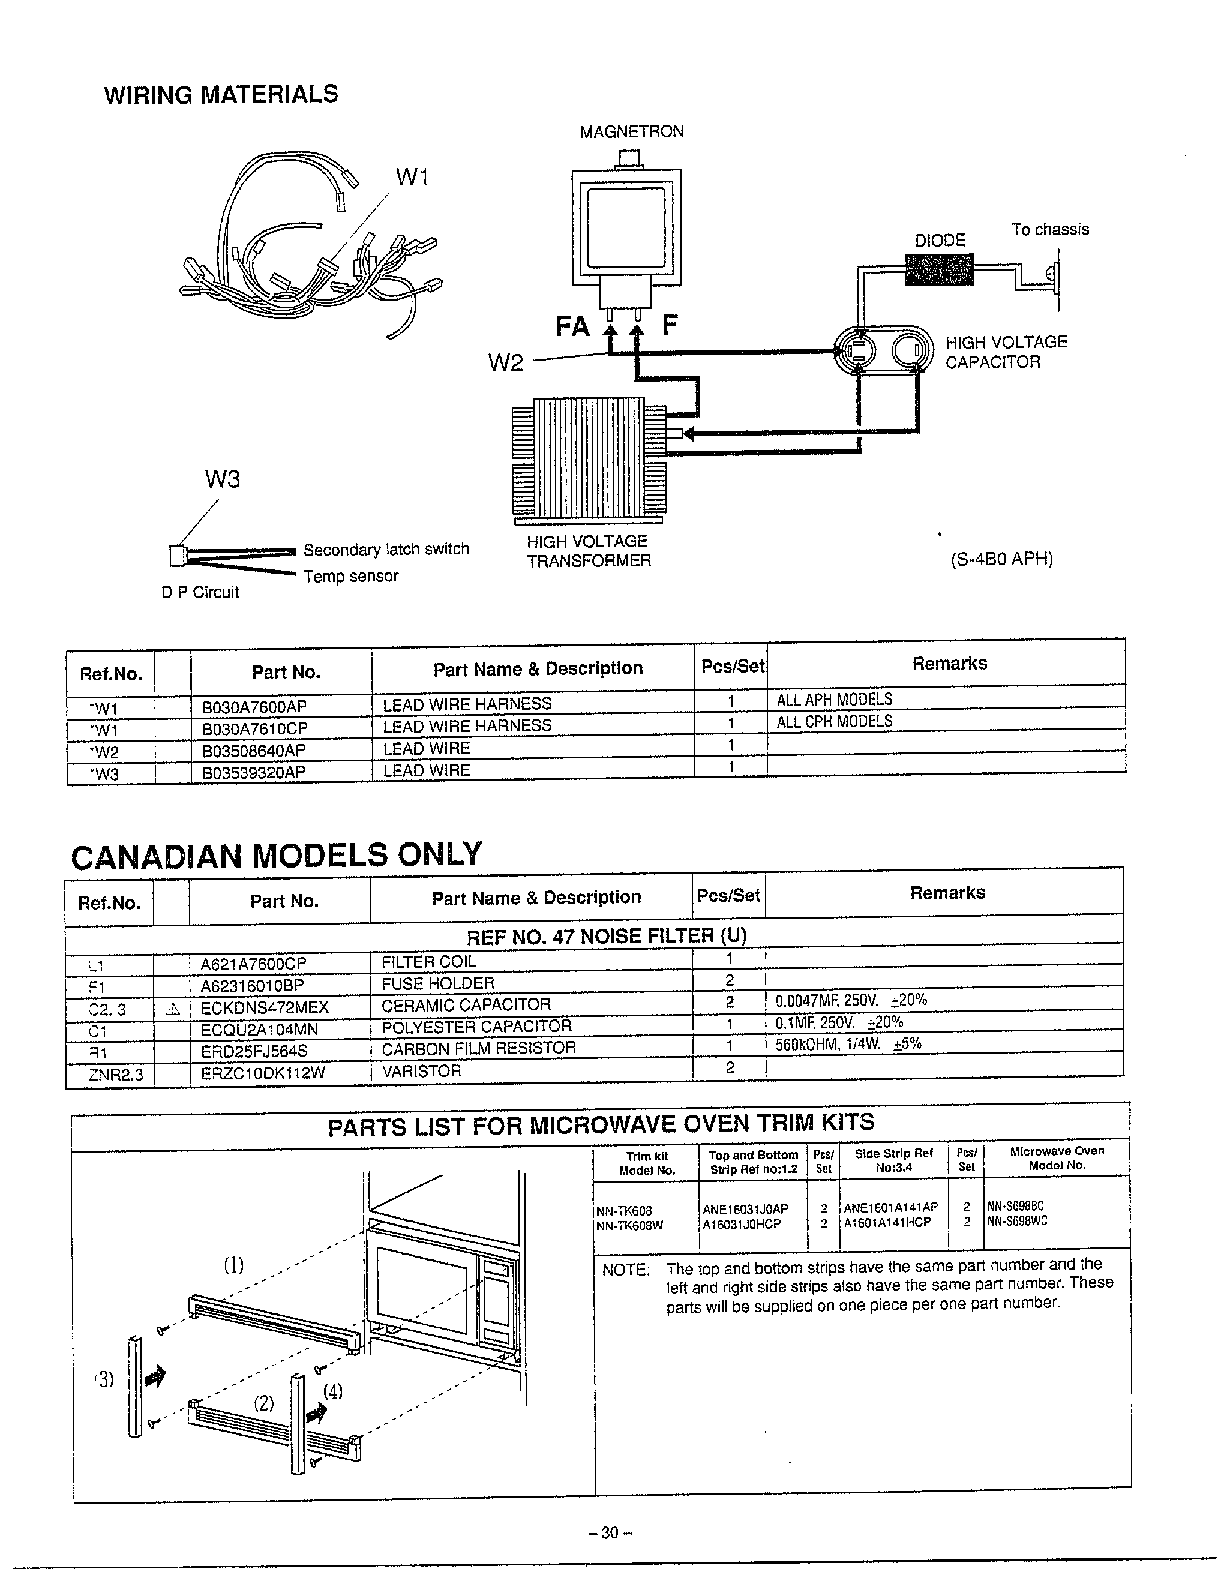 WIRING/NOISE FILTER/OVEN TRIM KITS Diagram & Parts List for Model